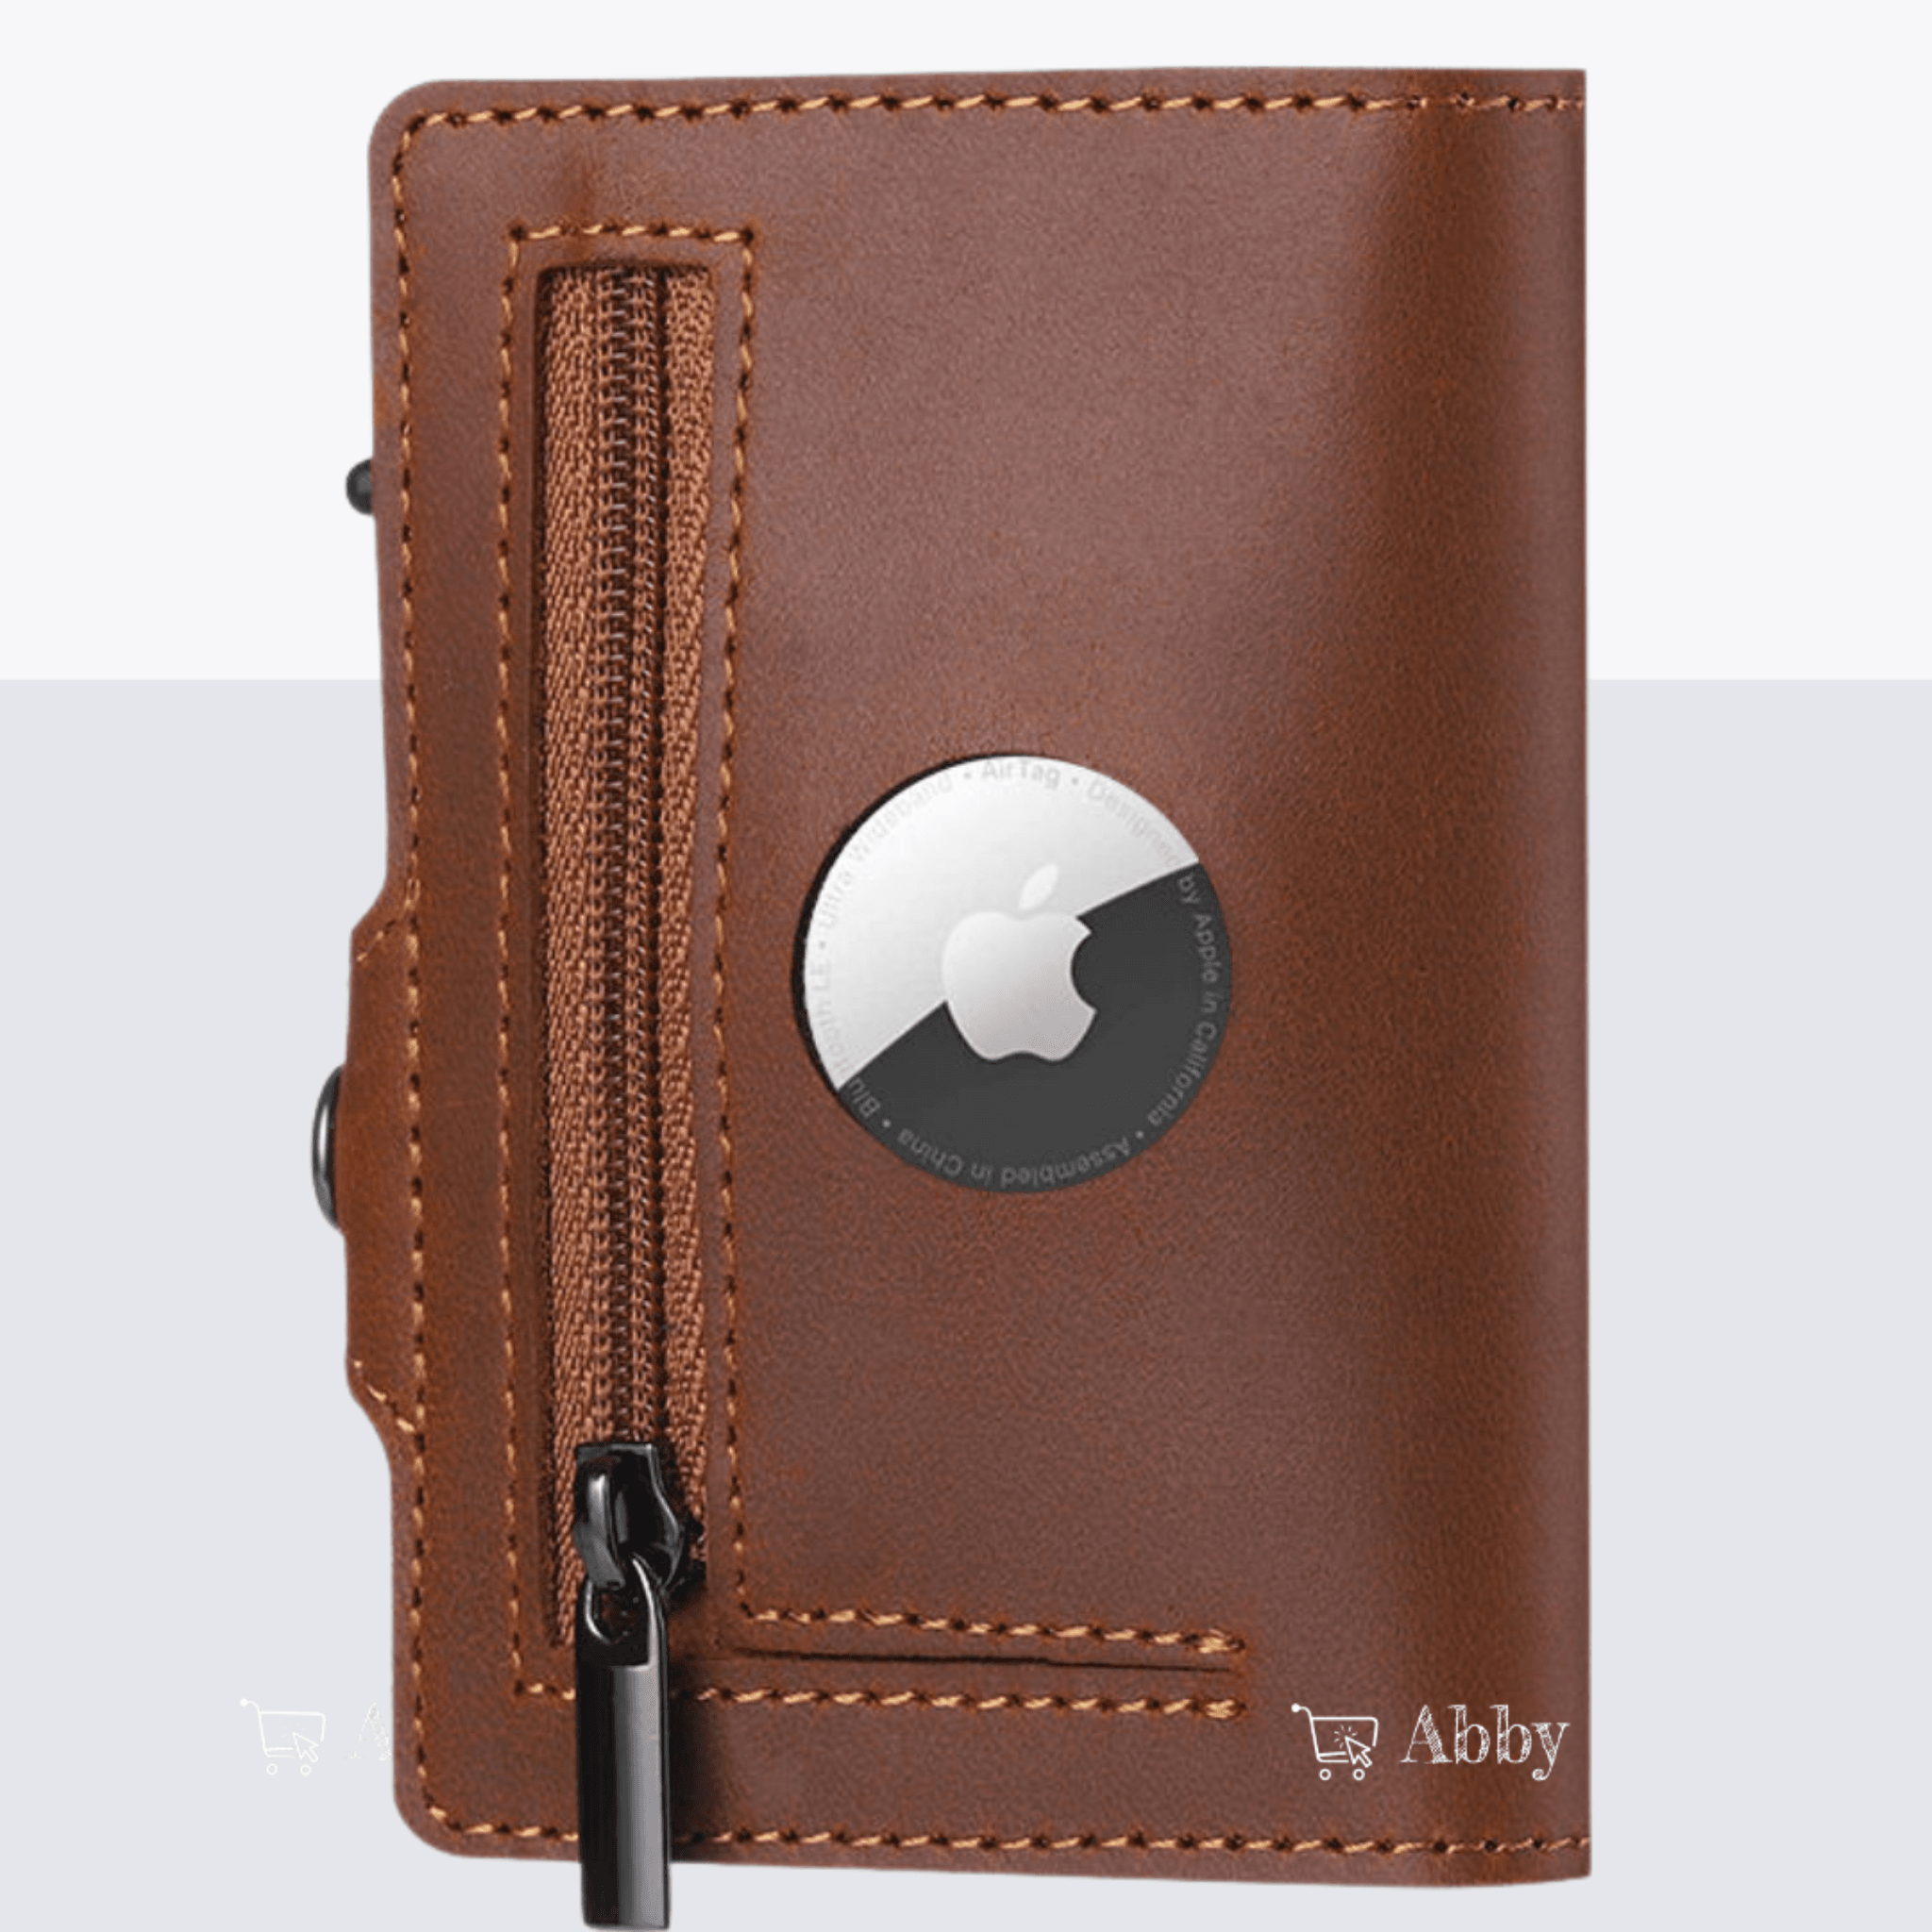 Abby's™ AirTag Trackable Leather Wallet with Apple AirTag Holder Case - RFID Blocking and Protection - Abbycart